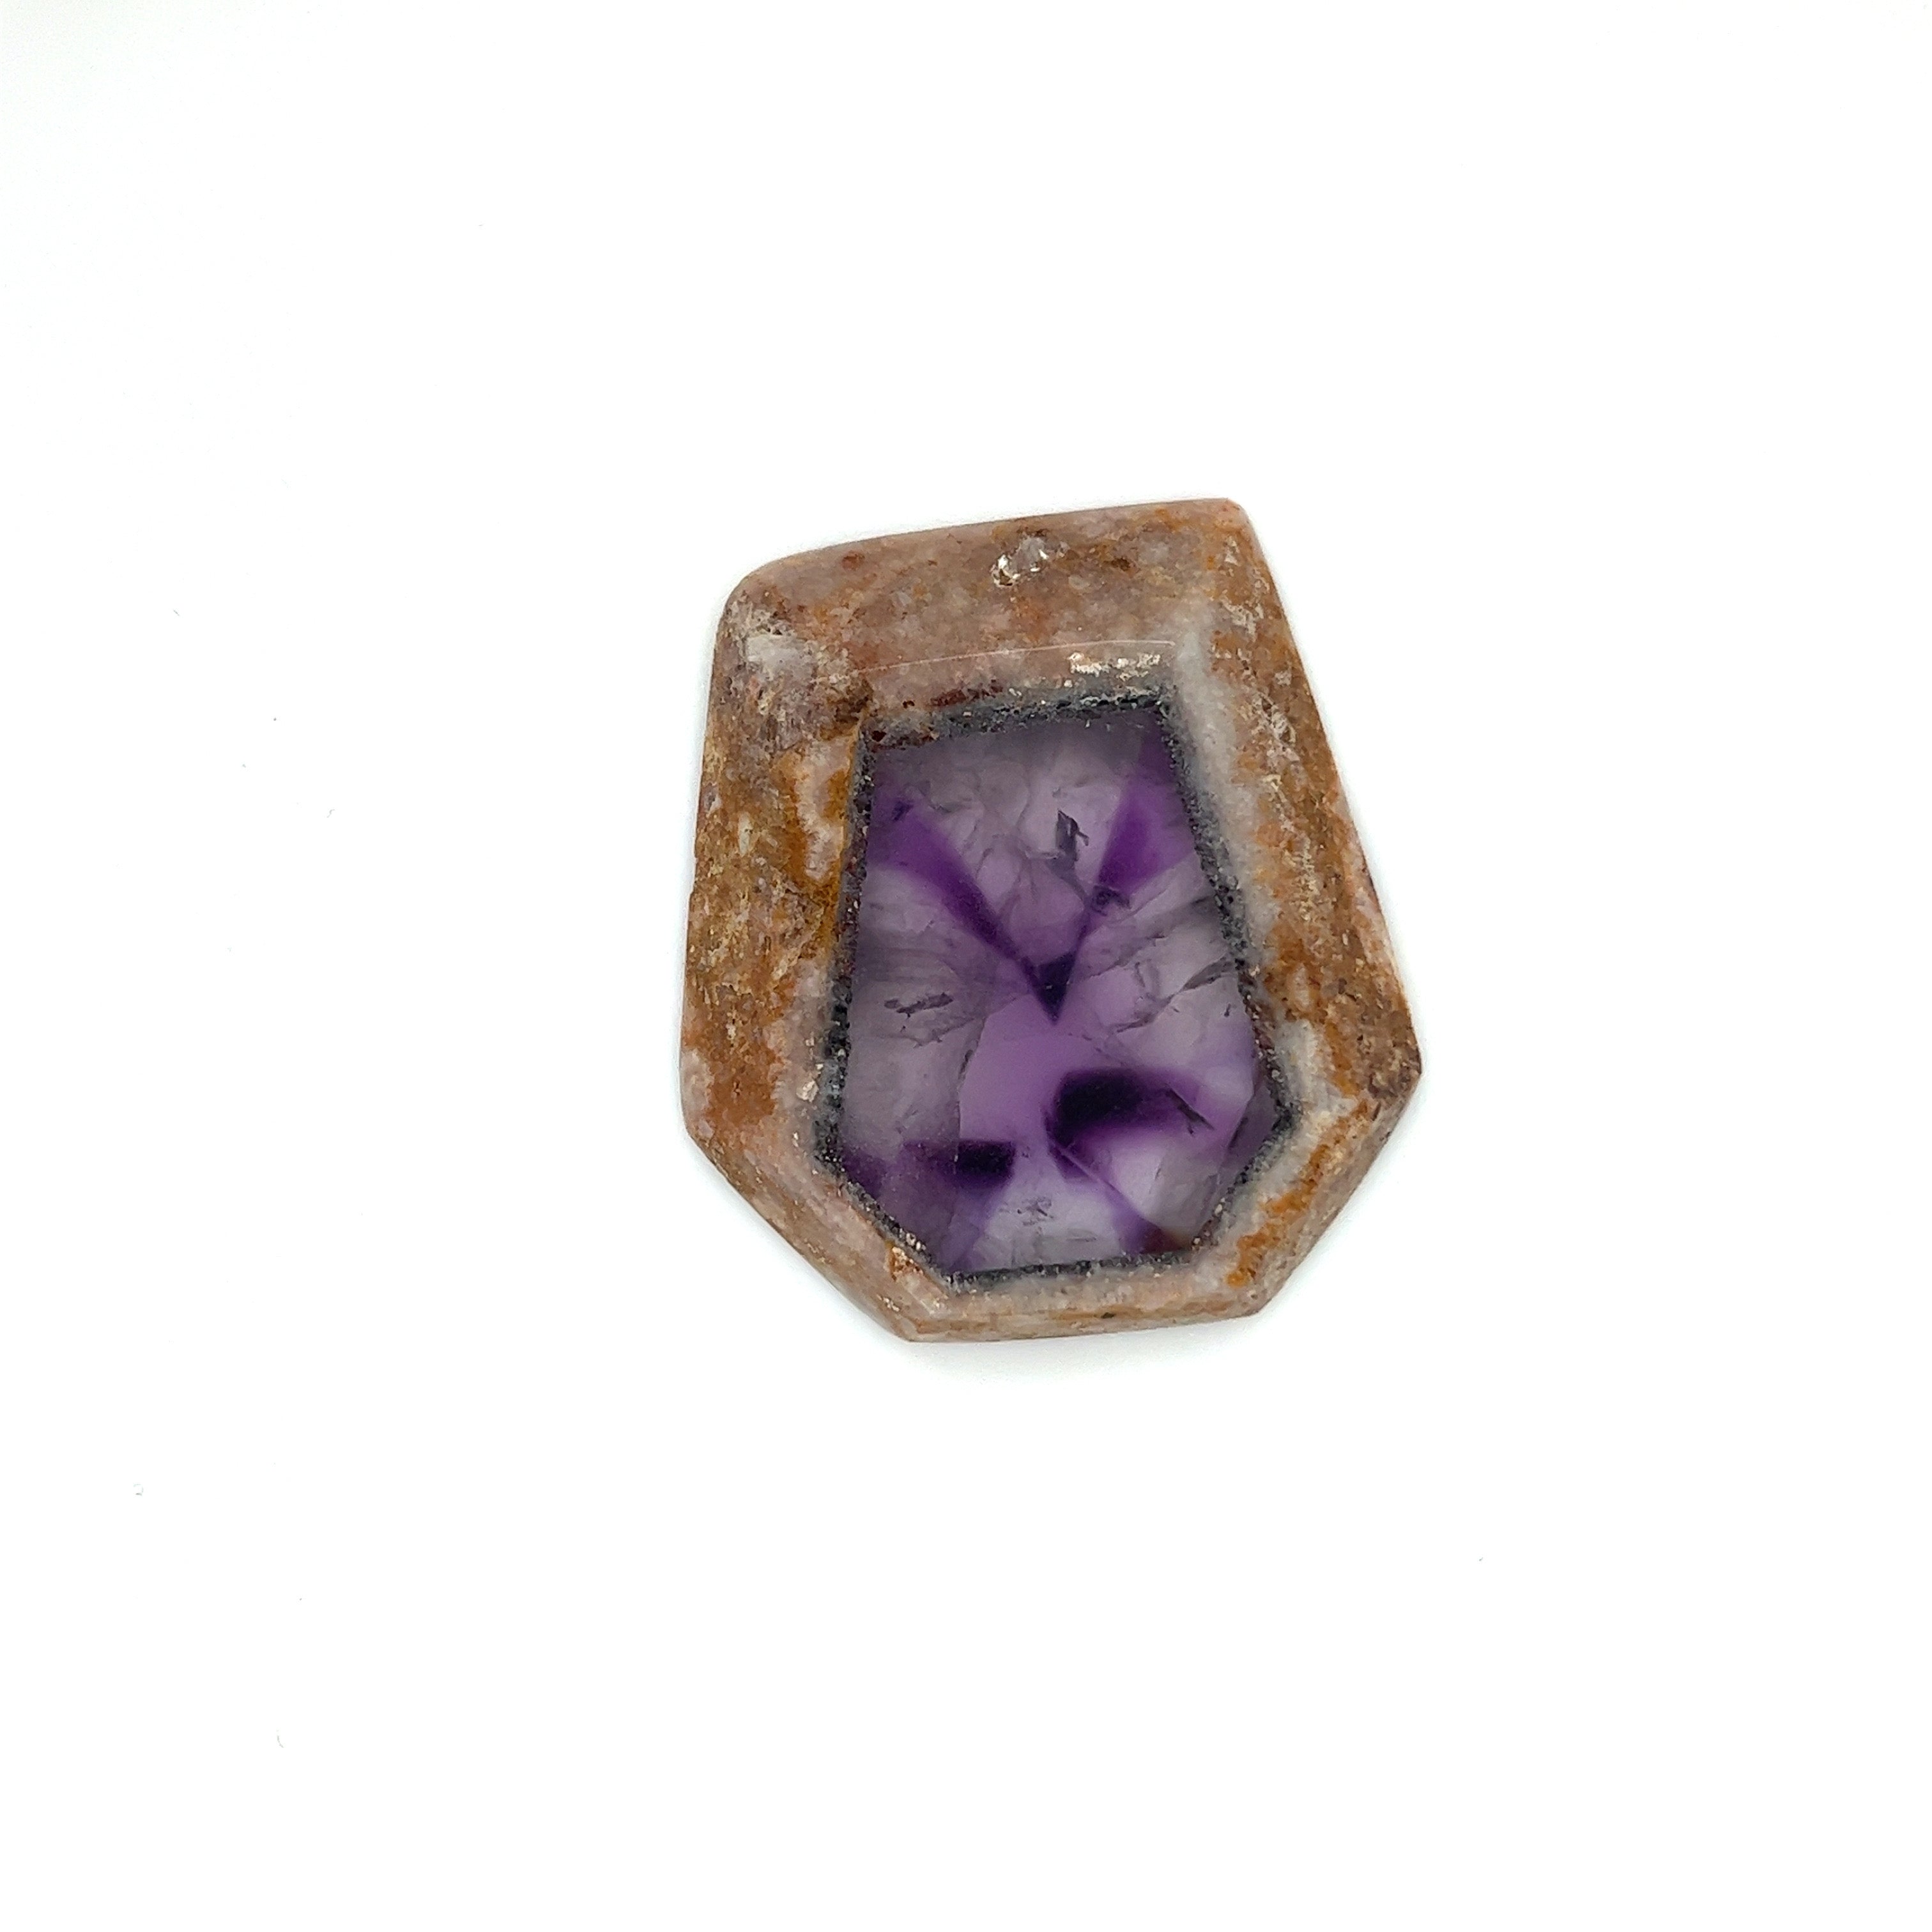 Trapiche Amethyst; Natural Untreated India Amethyst Slice, 17 grams - Mark Oliver Gems